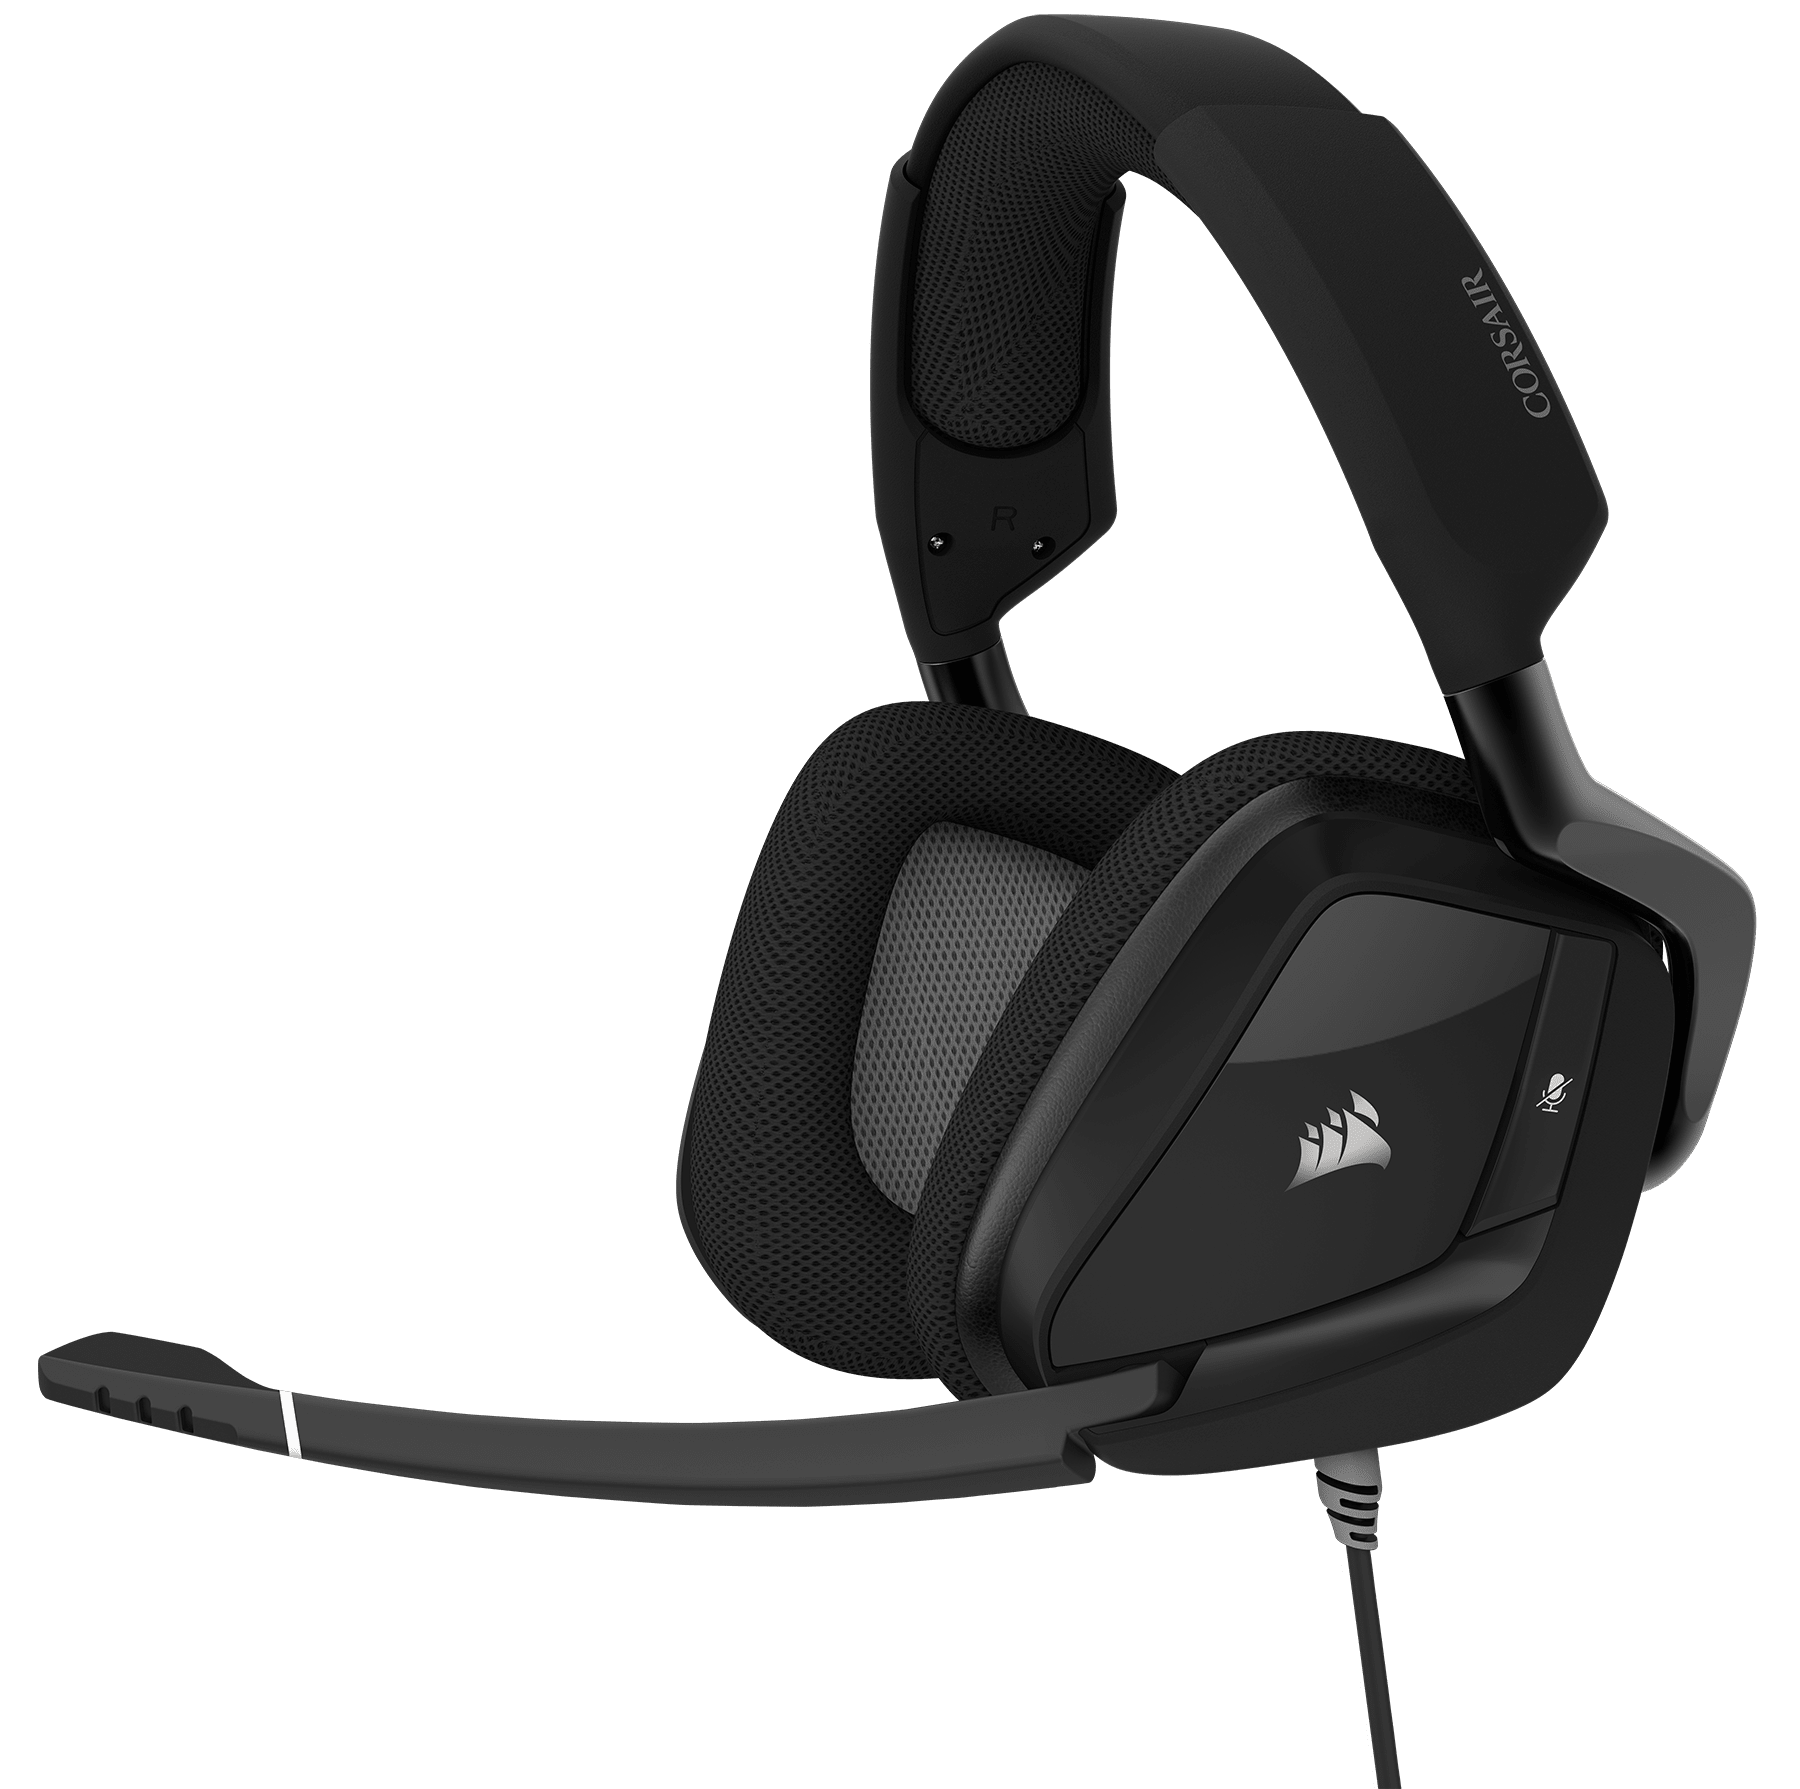 Corsair Headset: The Ultimate Gaming Audio Experience